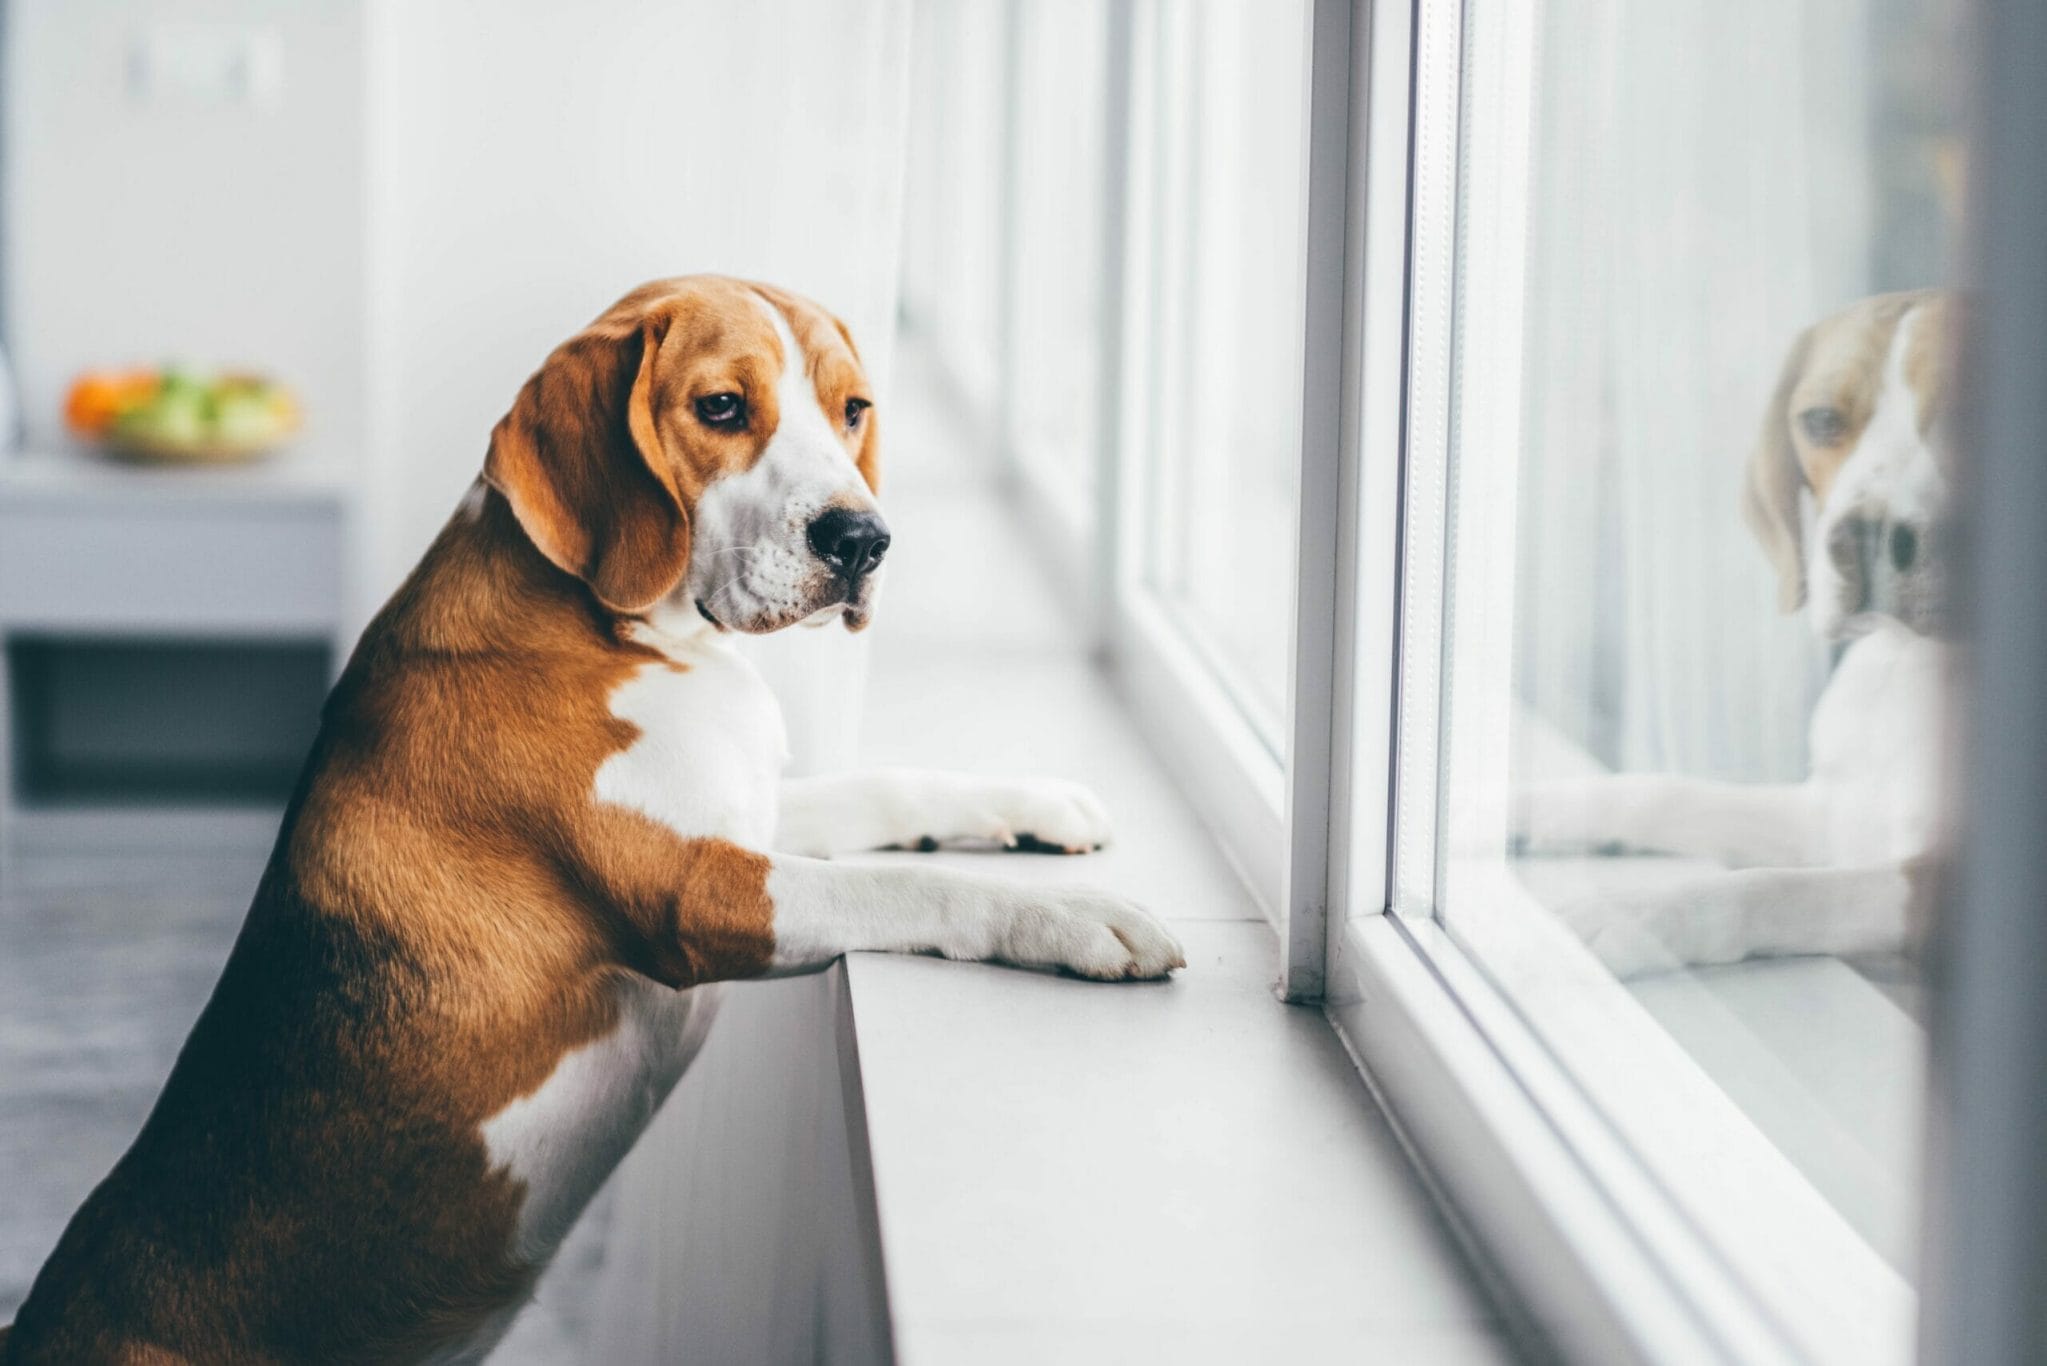 How to protect window sills from dogs?